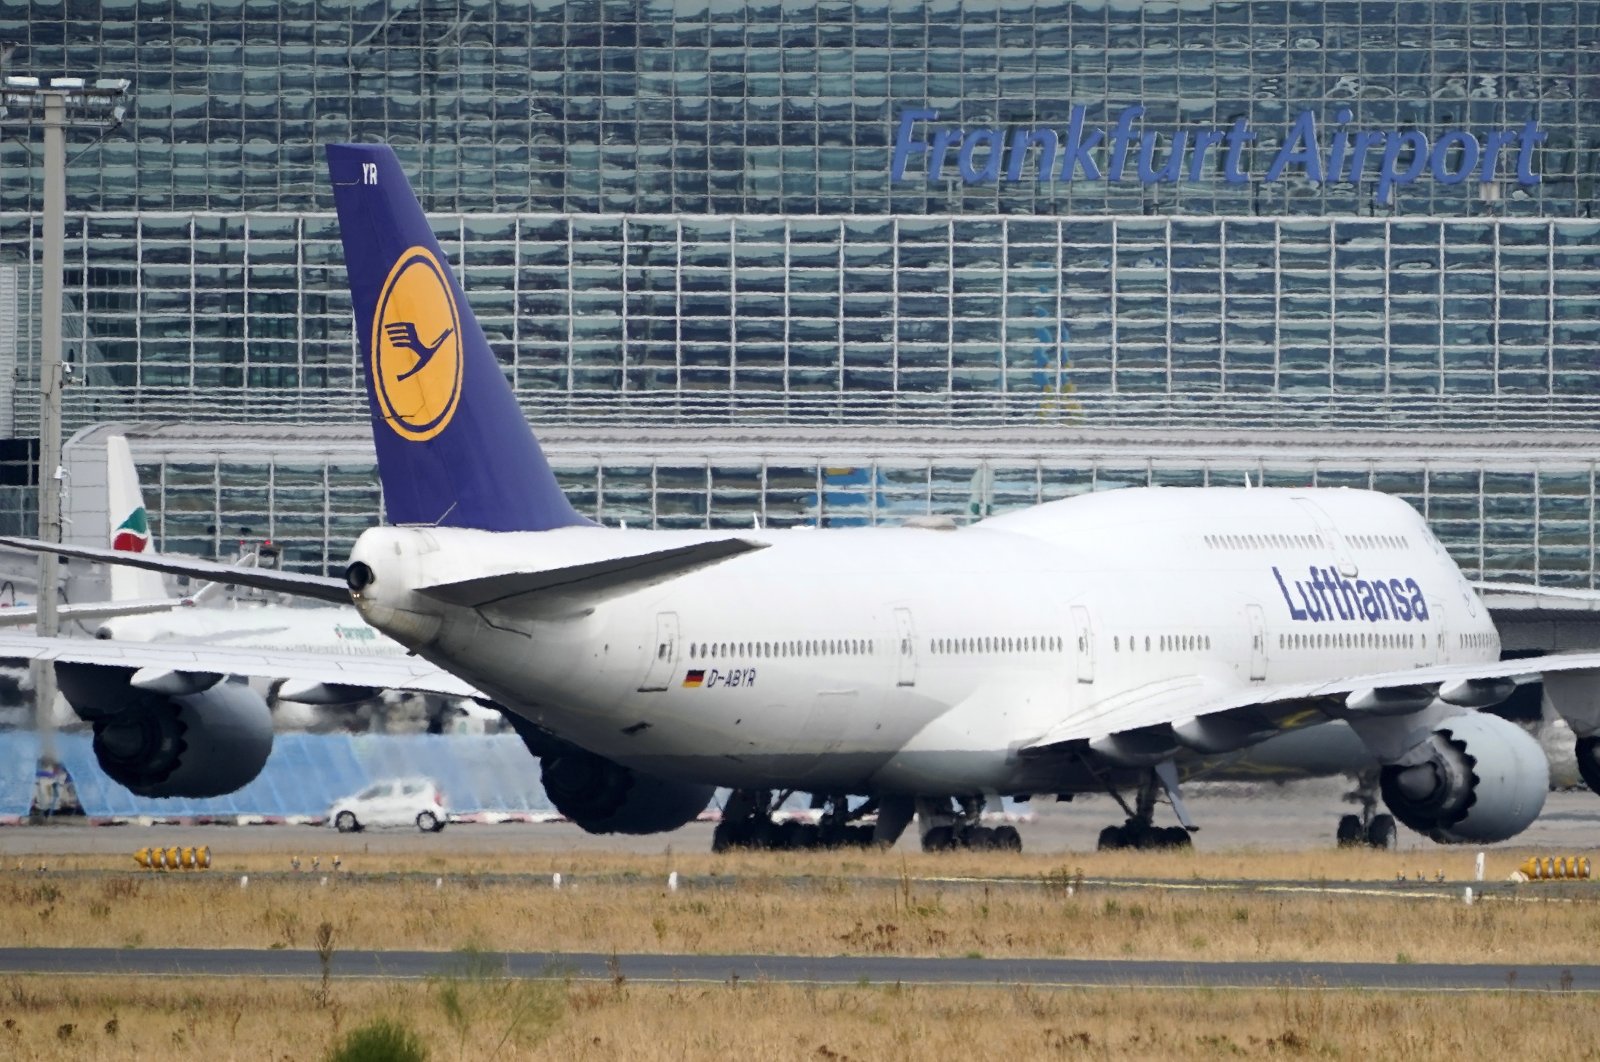 A Boeing 747 of German airline Lufthansa taxis on the international airport in Frankfurt am Main, Germany, Sept. 1, 2022. (EPA Photo)